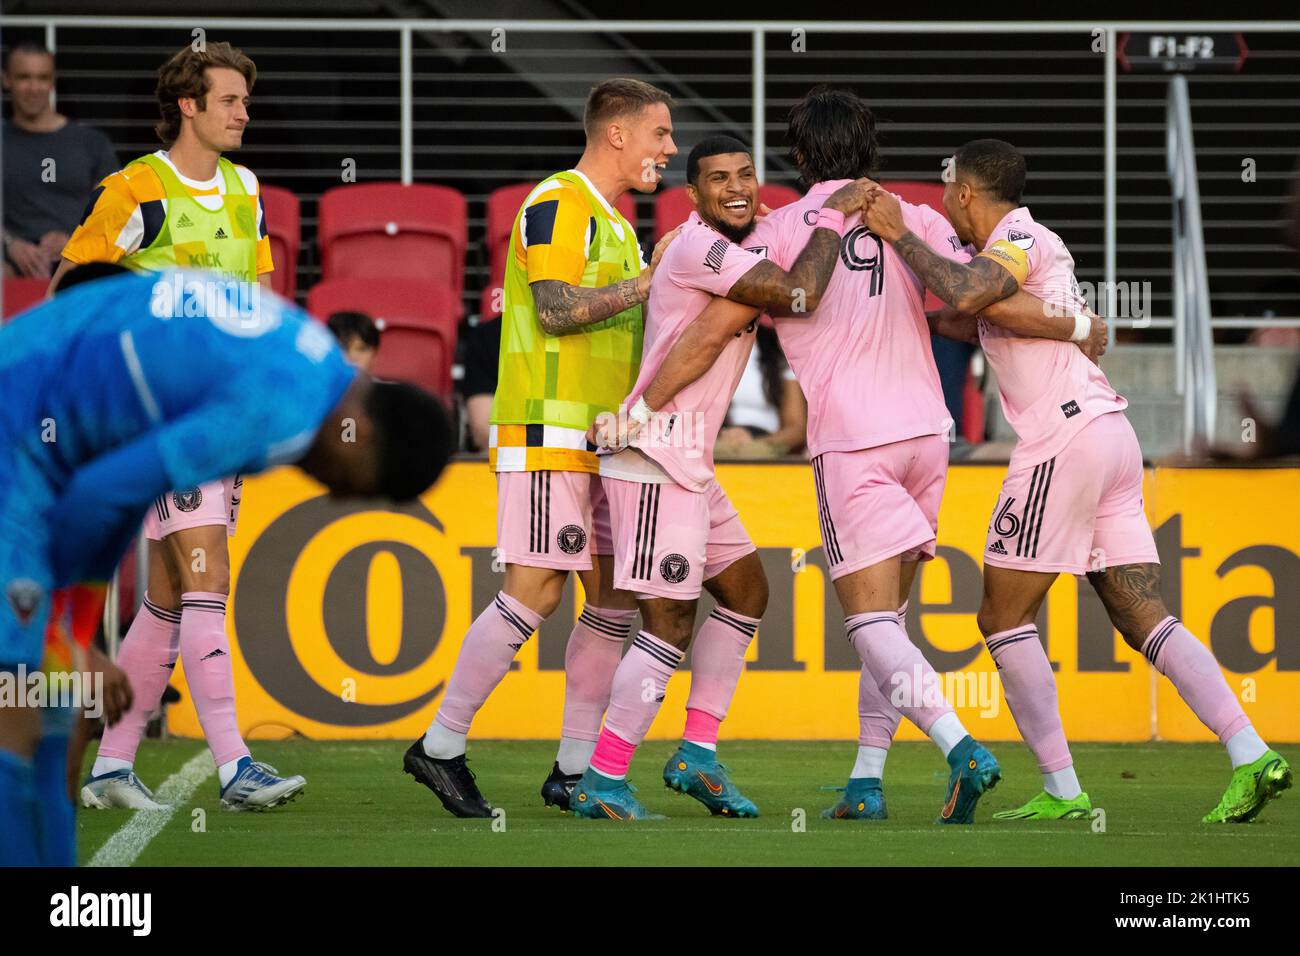 Washington DC, USA. 18th Sep, 2022. Miami forward Leonardo Campana celebrates after scoring with Miami defender Deandre Yedlin and other teammates, during a 2-3 DC United defeat vs. Inter Miami CF in Major League Soccer (MLS), at Audi Field, in Washington, DC, on Sunday, September 18, 2022. (Graeme Sloan/Sipa USA) Credit: Sipa USA/Alamy Live News Stock Photo